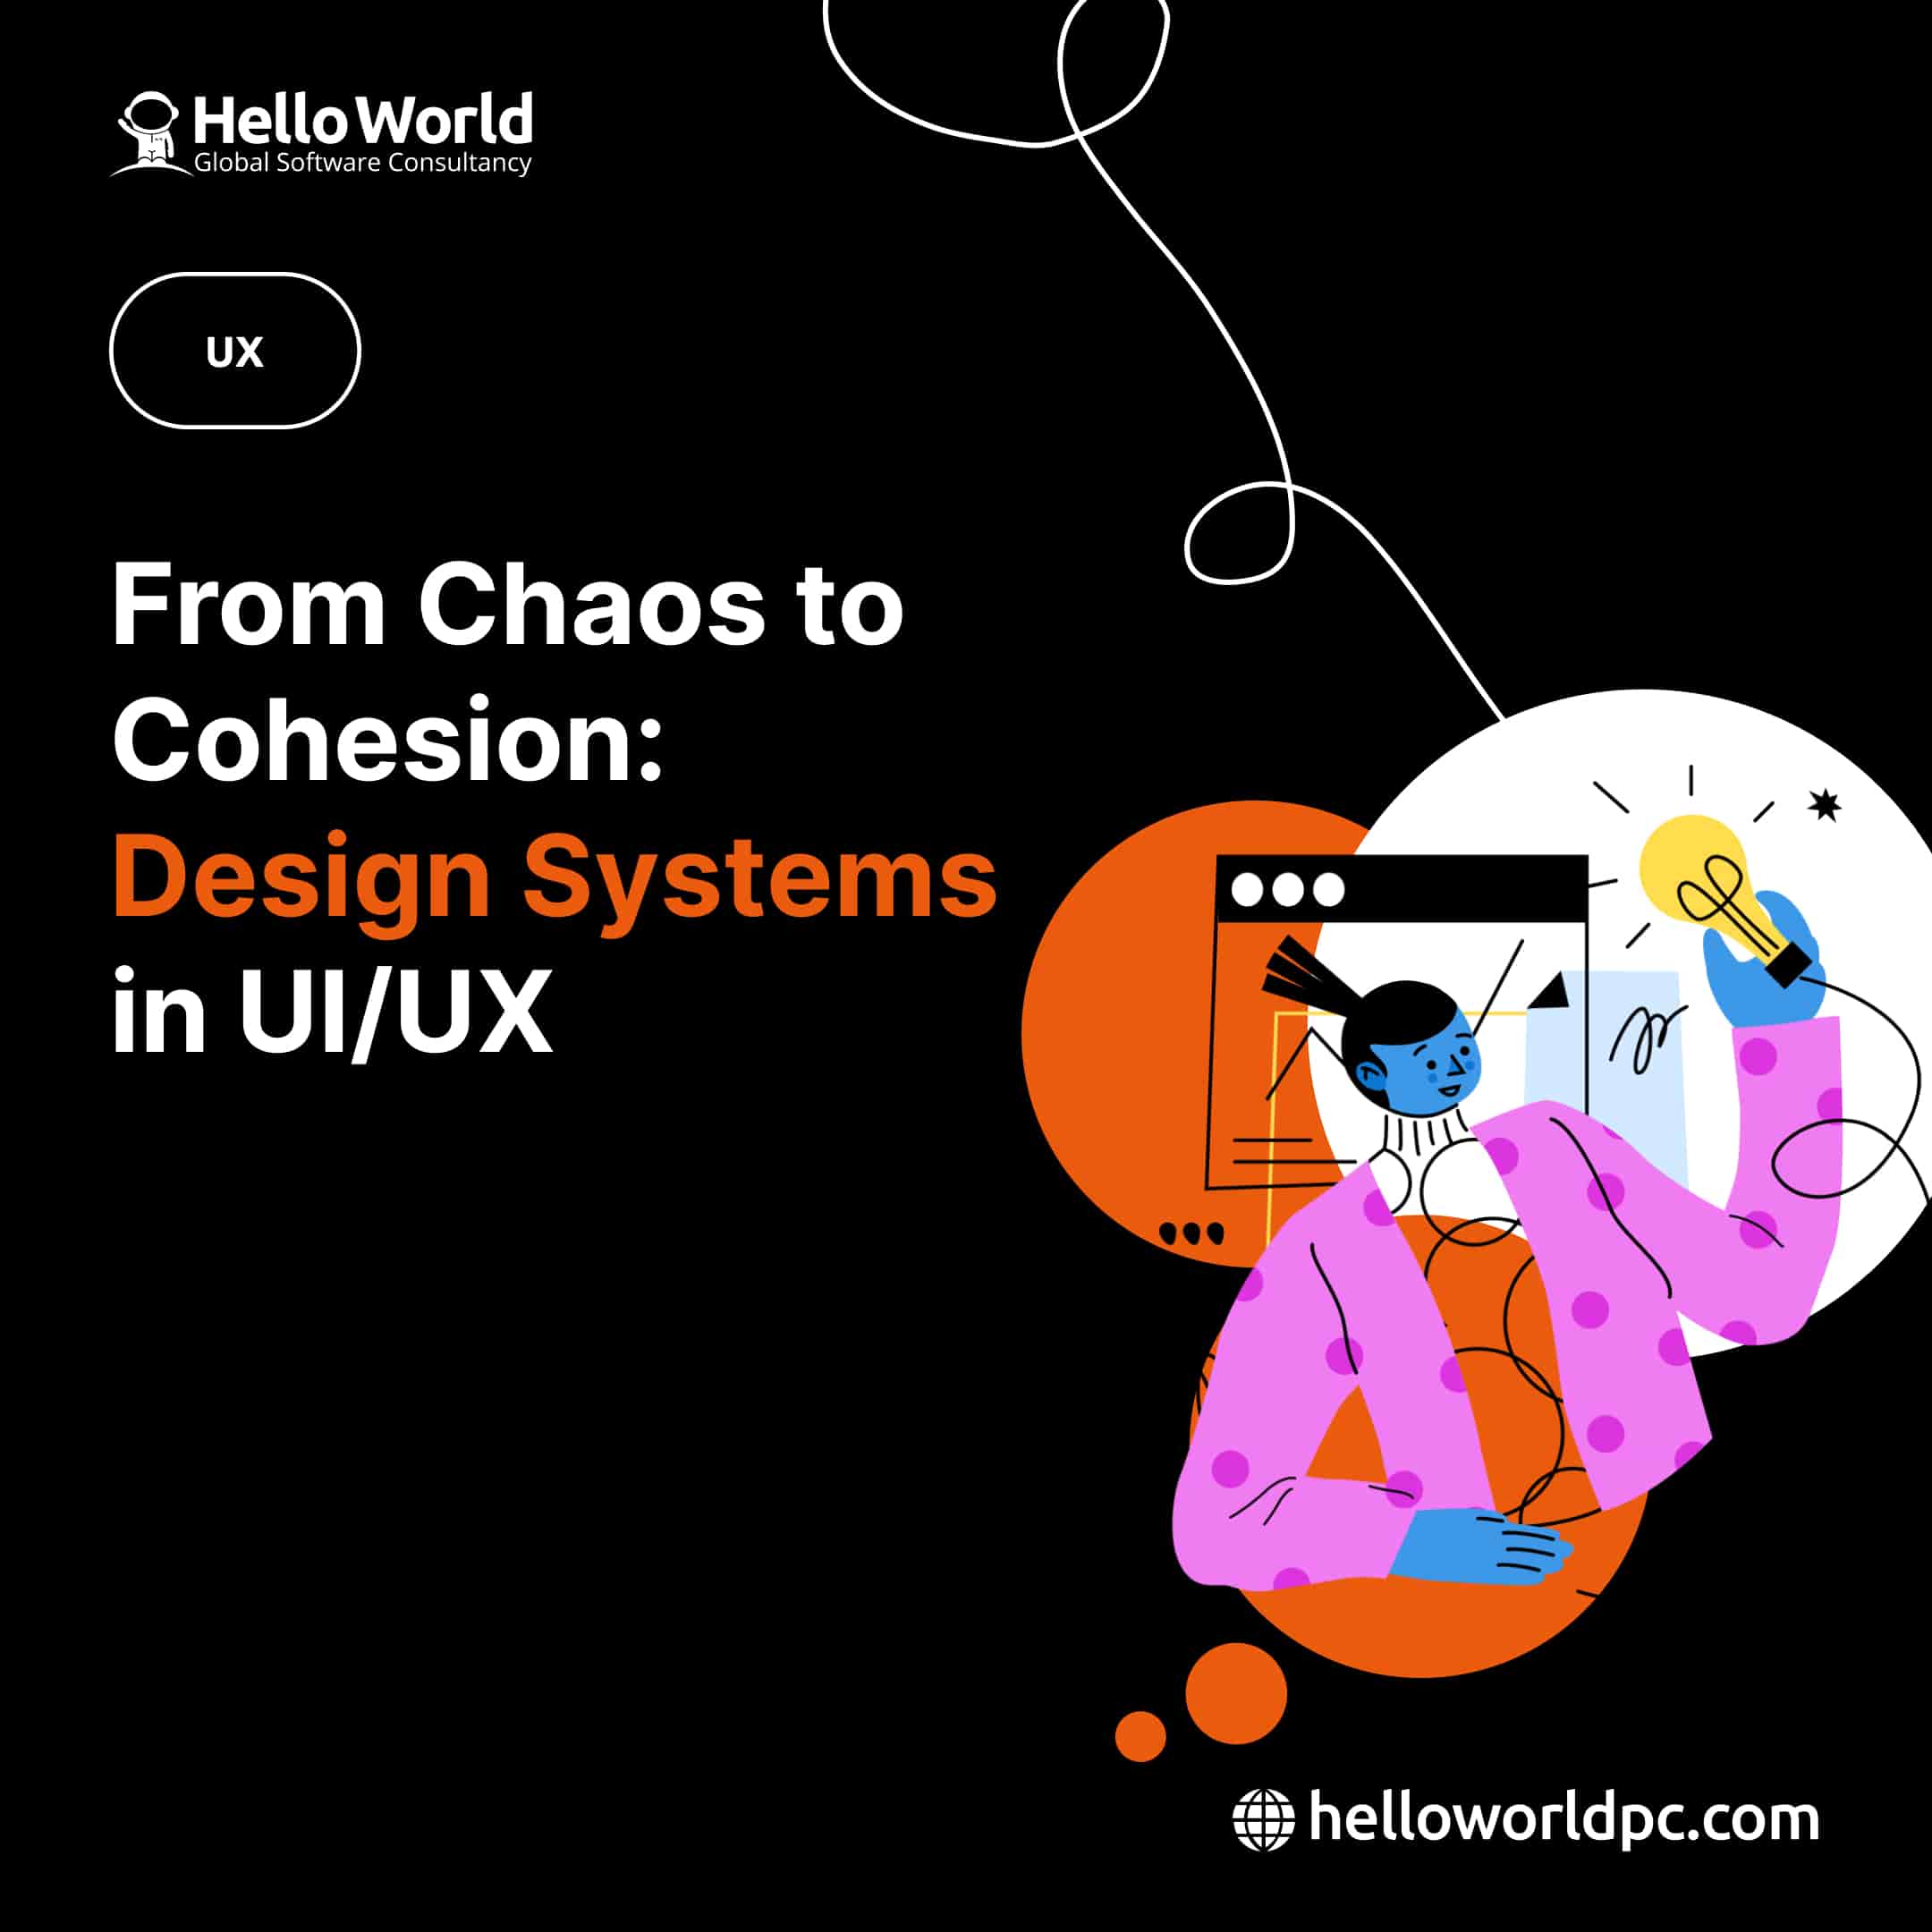 From Chaos to Cohesion: Design Systems in UI/UX